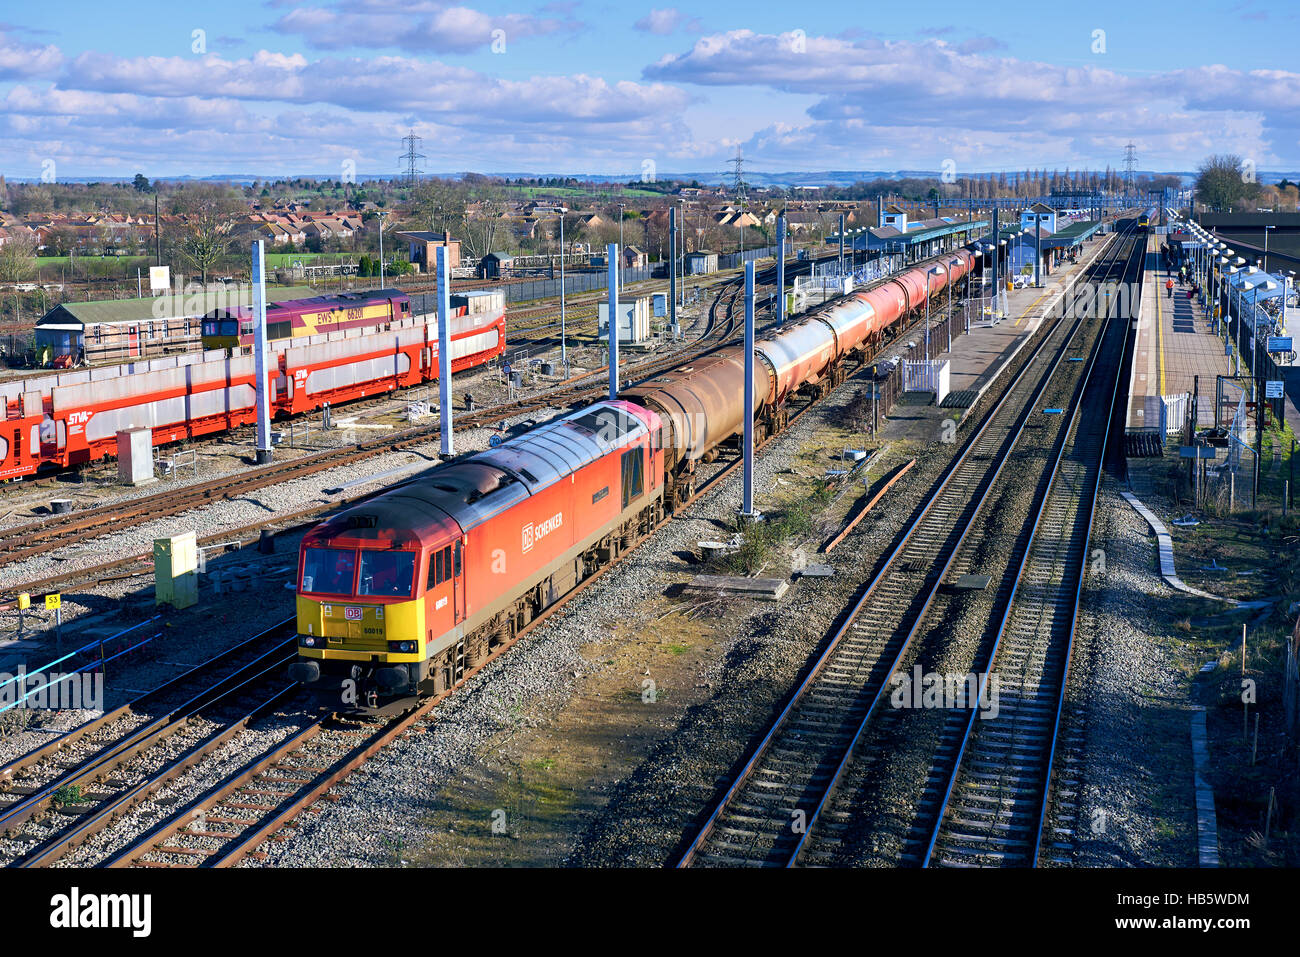 DBS 60019 power through Didcot Parkway with 6B33 Theale - Robeston Murco boggie tanks on 18th Feb 2016. Electricication here is at an advanced stage. Stock Photo